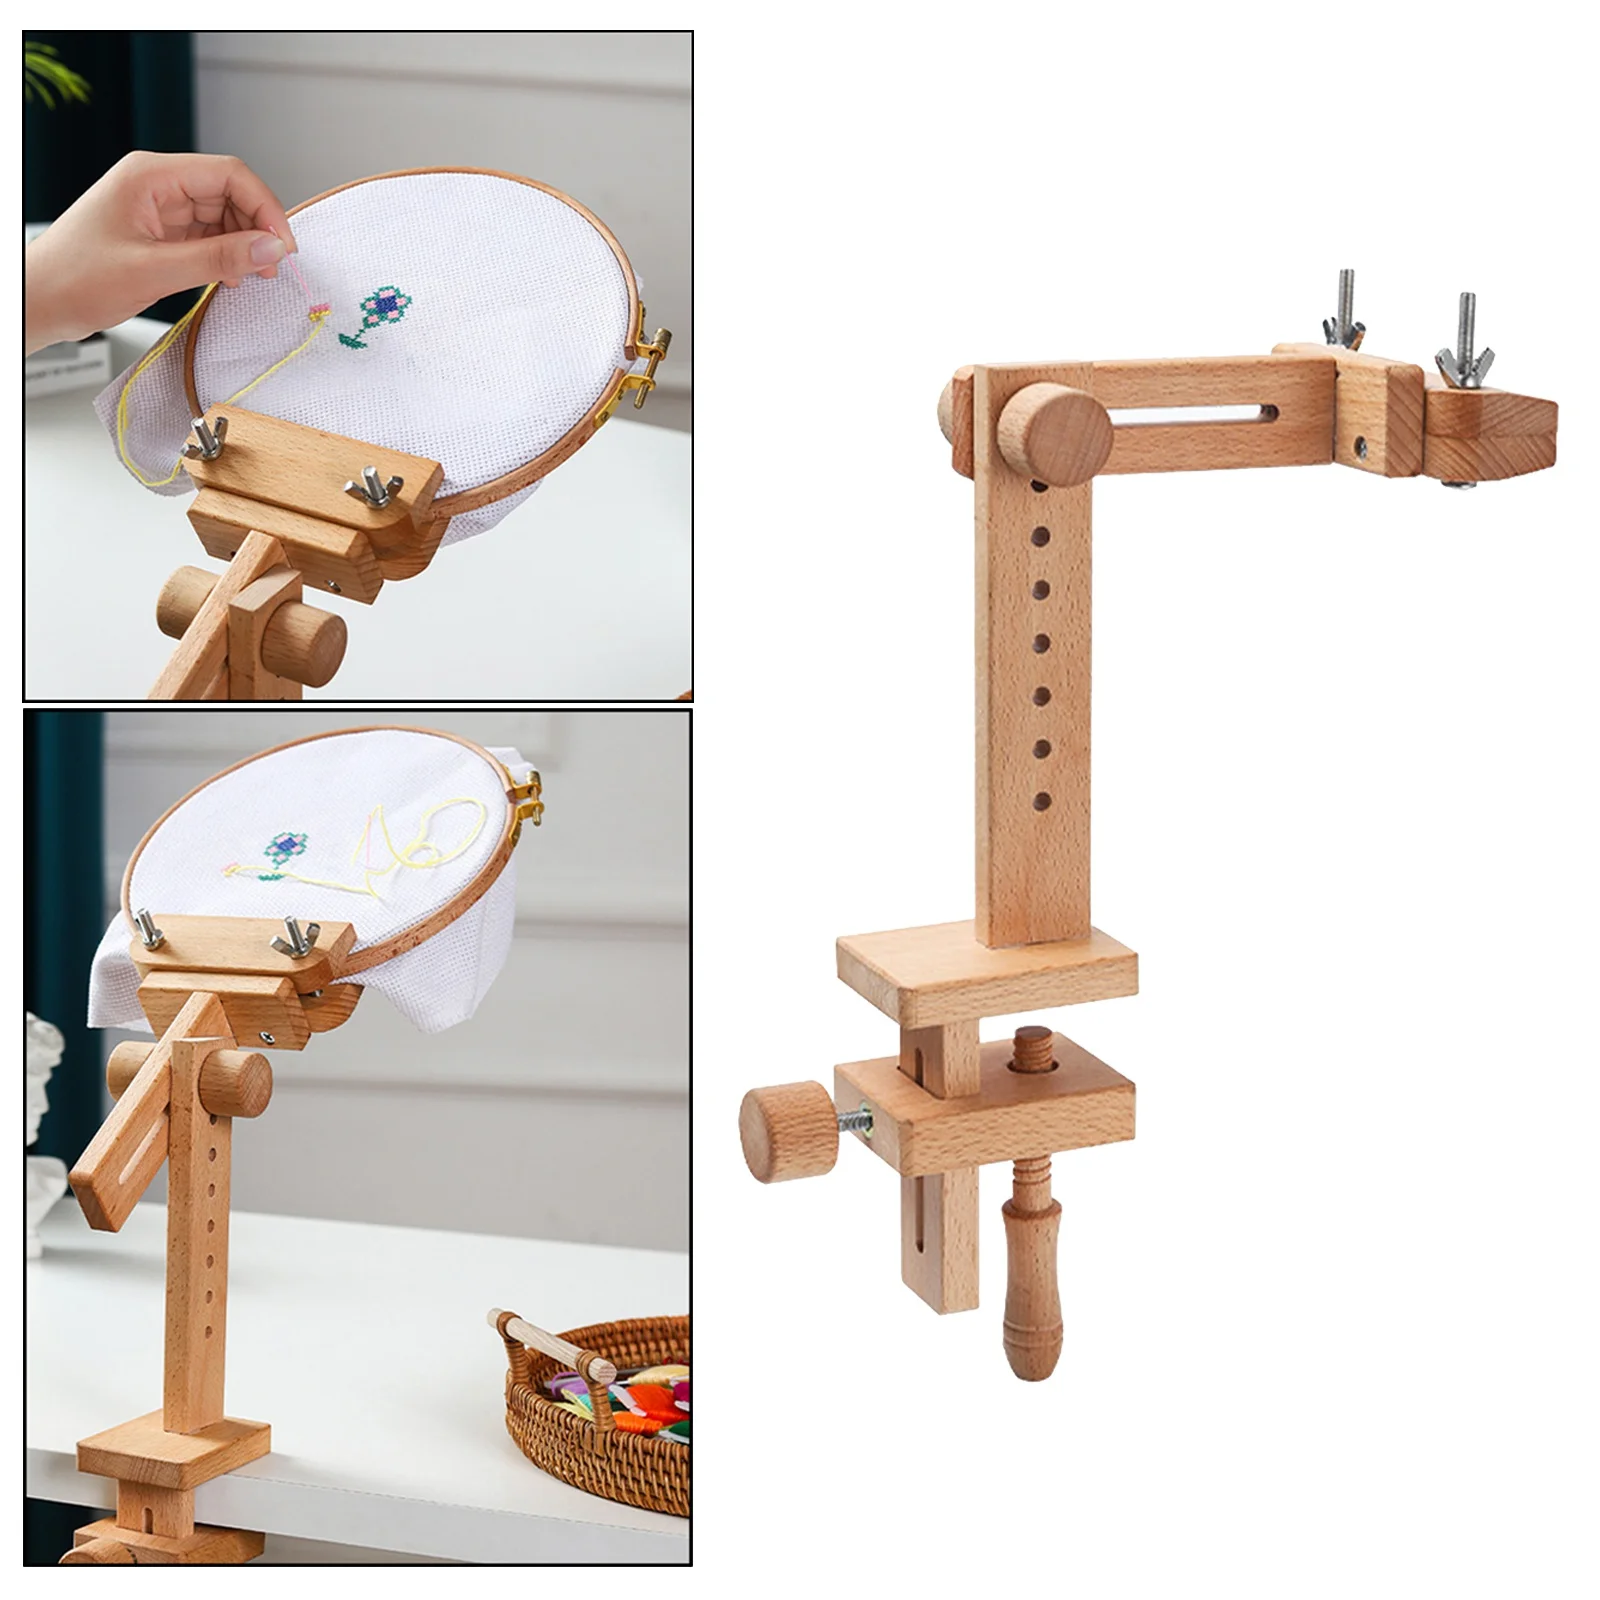 Embroidery Stand With 6inch Hoop - Rotated Embroidery Hoop Stand